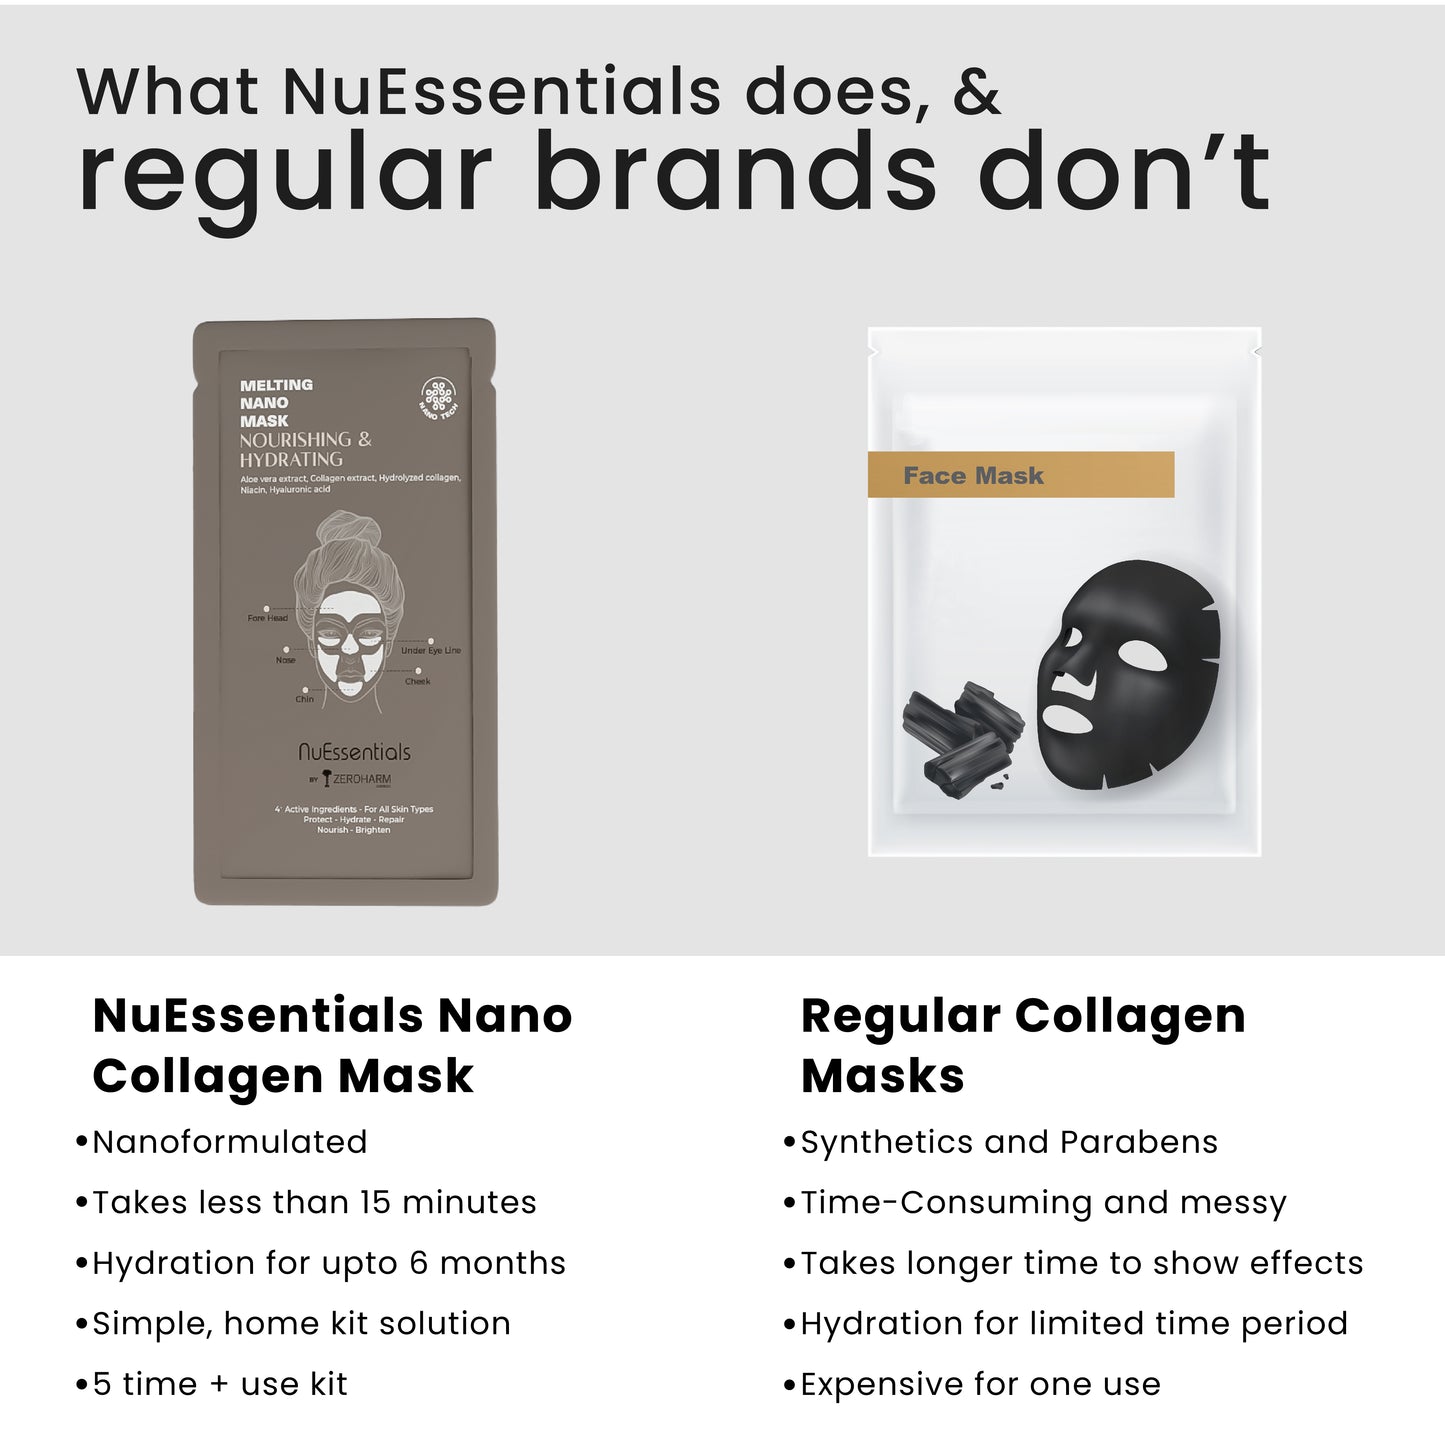 NuEssentials Nourishing & Hydrating Mask